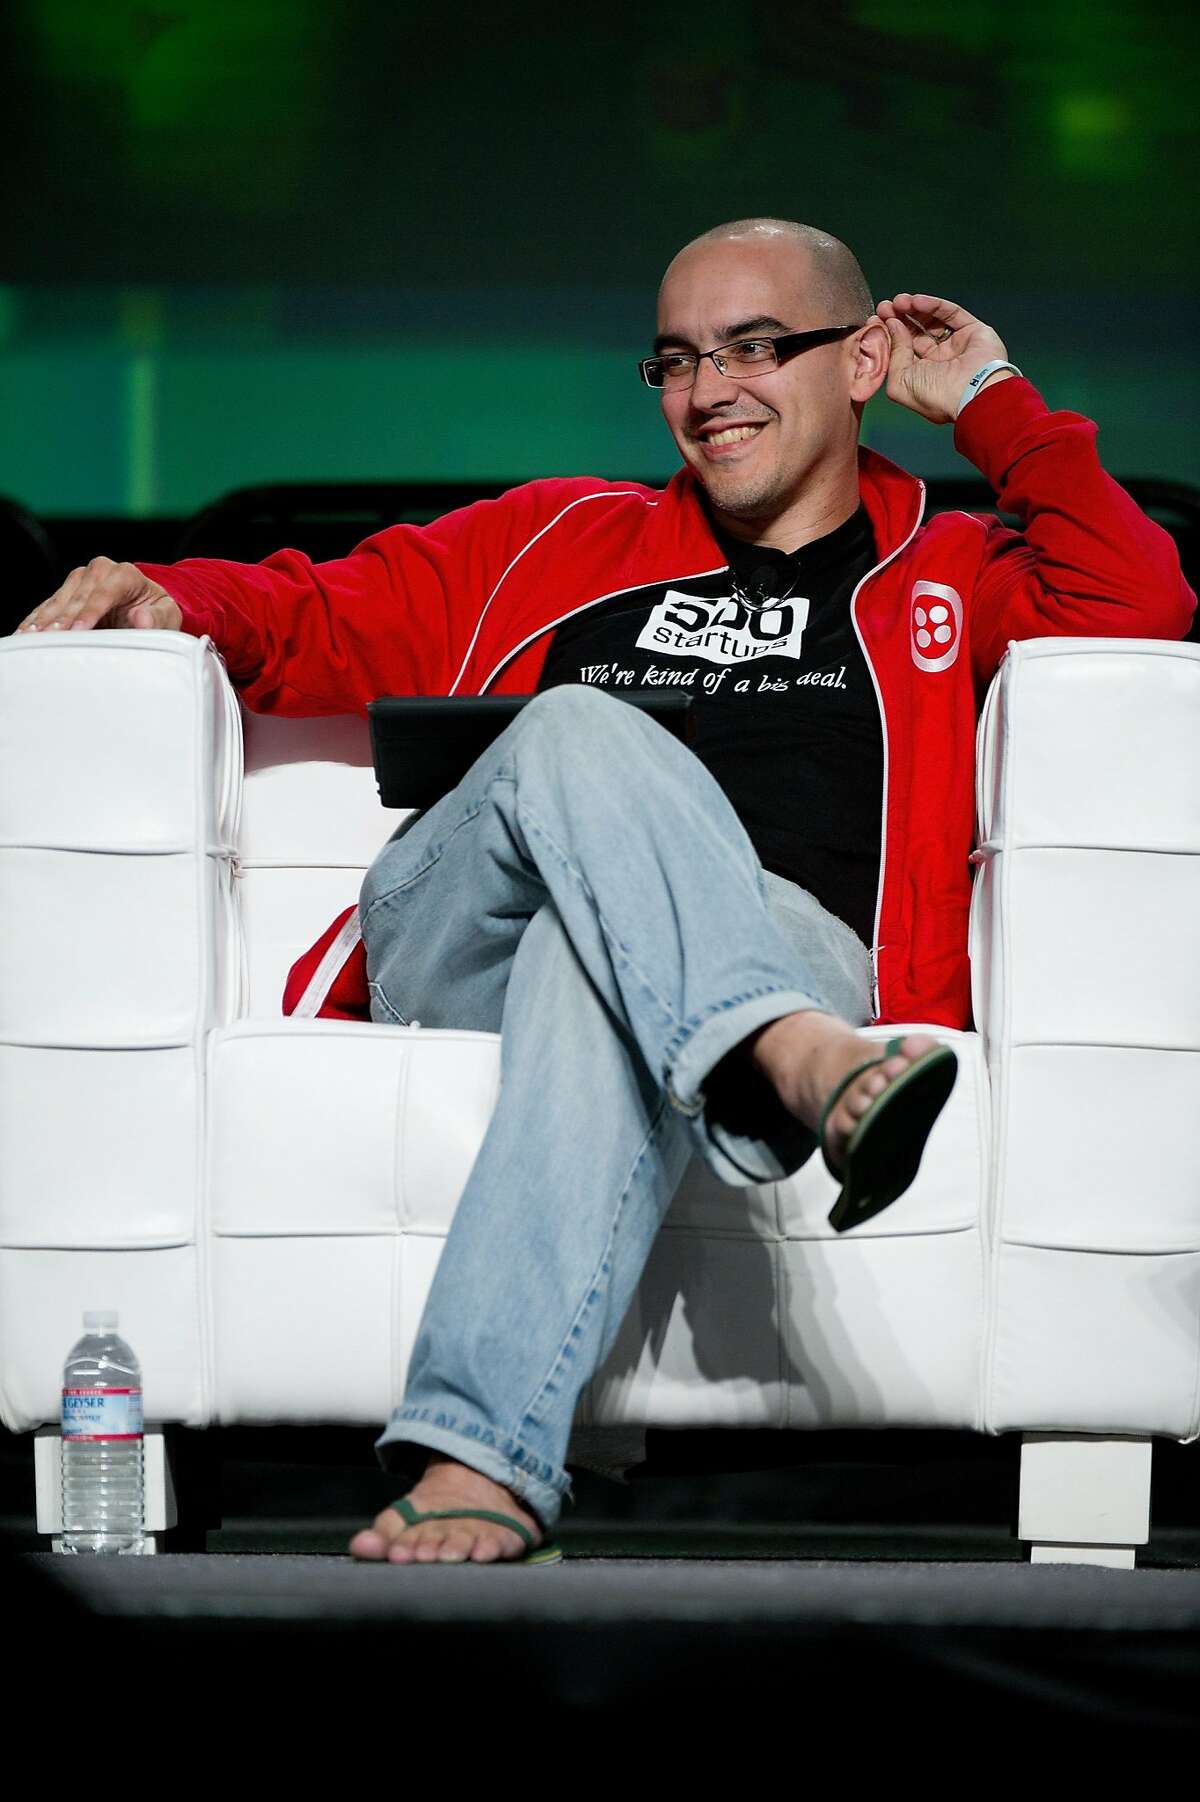 Dave McClure, founding general partner at 500 Startups, speaks during a group discussion at the TechCrunch Disrupt SF 2011 conference in San Francisco, California, U.S., on Wednesday, Sept. 14, 2011. More than 2,000 attendees are expected at the conference and 30 startup companies are planning to launch as part of the "Startup Battlefield" program. Photographer: David Paul Morris/Bloomberg *** Local Caption *** Dave McClure